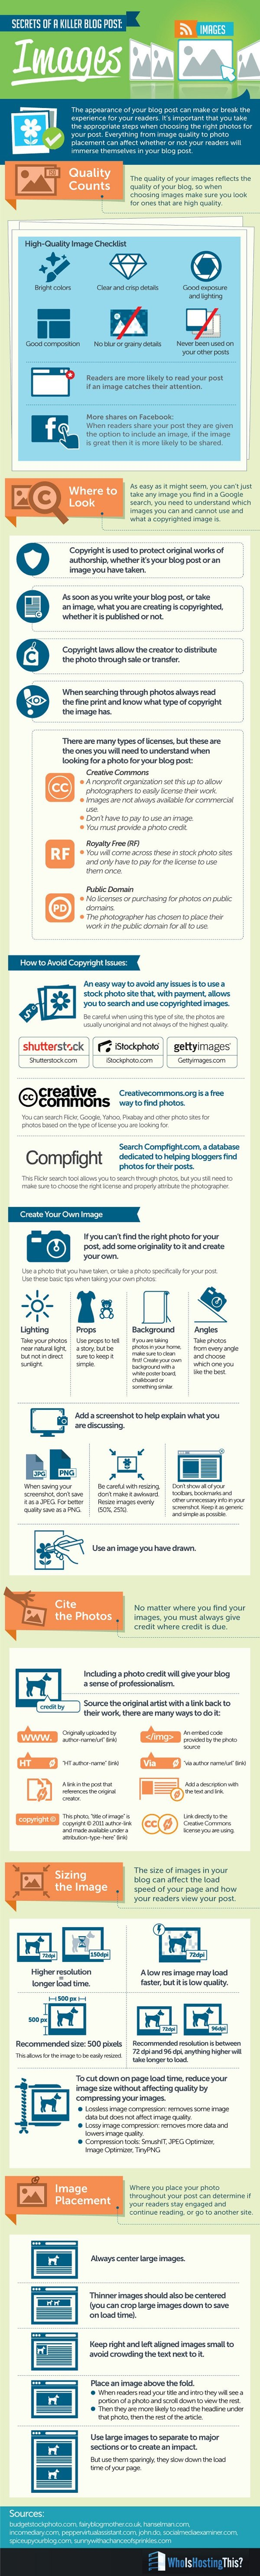 Blogging Best Practices Choosing the Right Images for Your Blog Post Infographic image